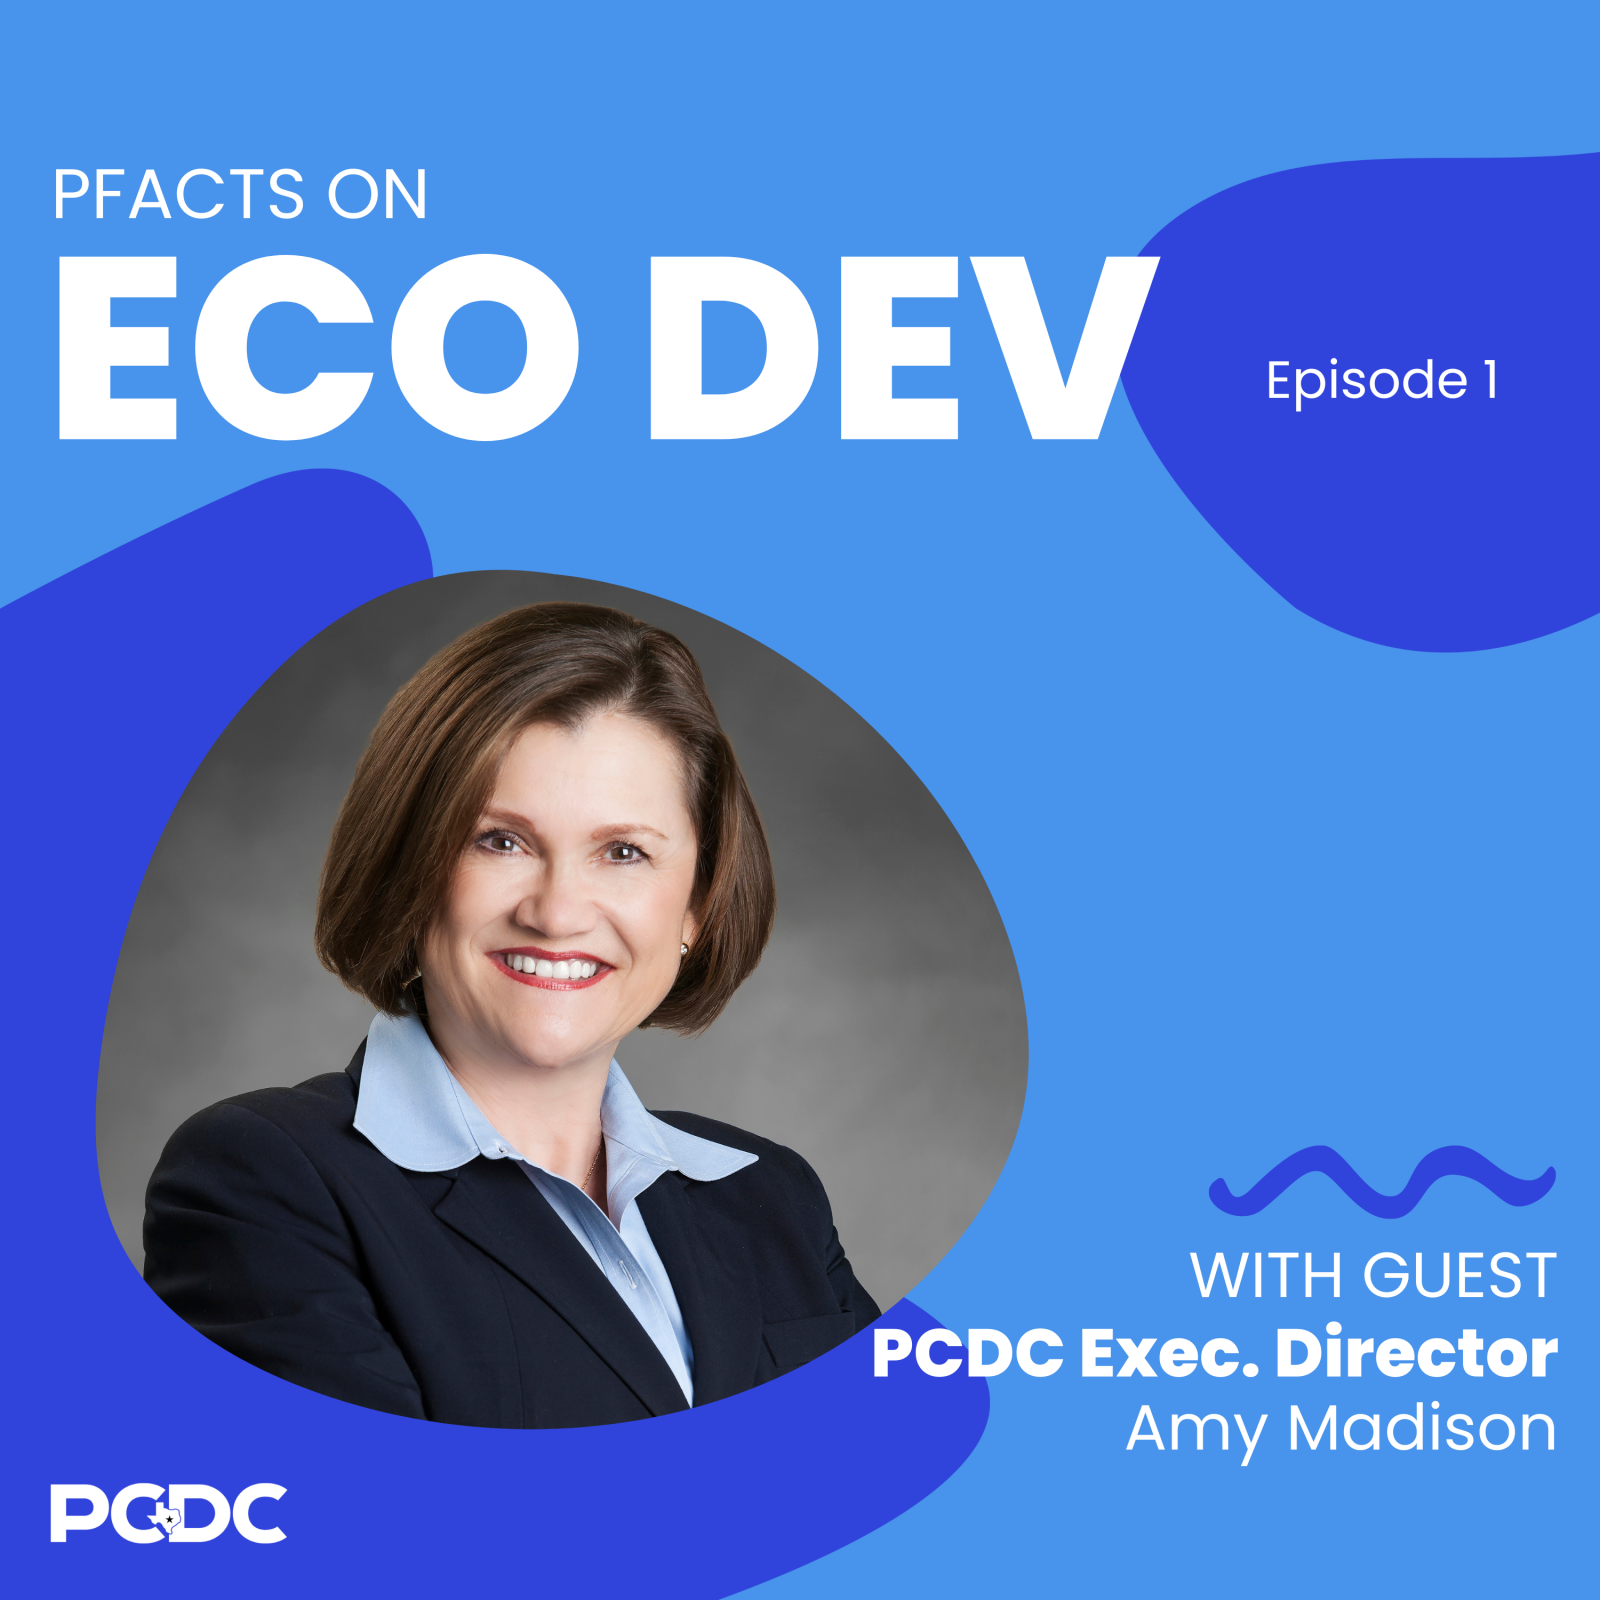 PFACTS ON ECO DEV PODCAST EPISODE 1 Photo